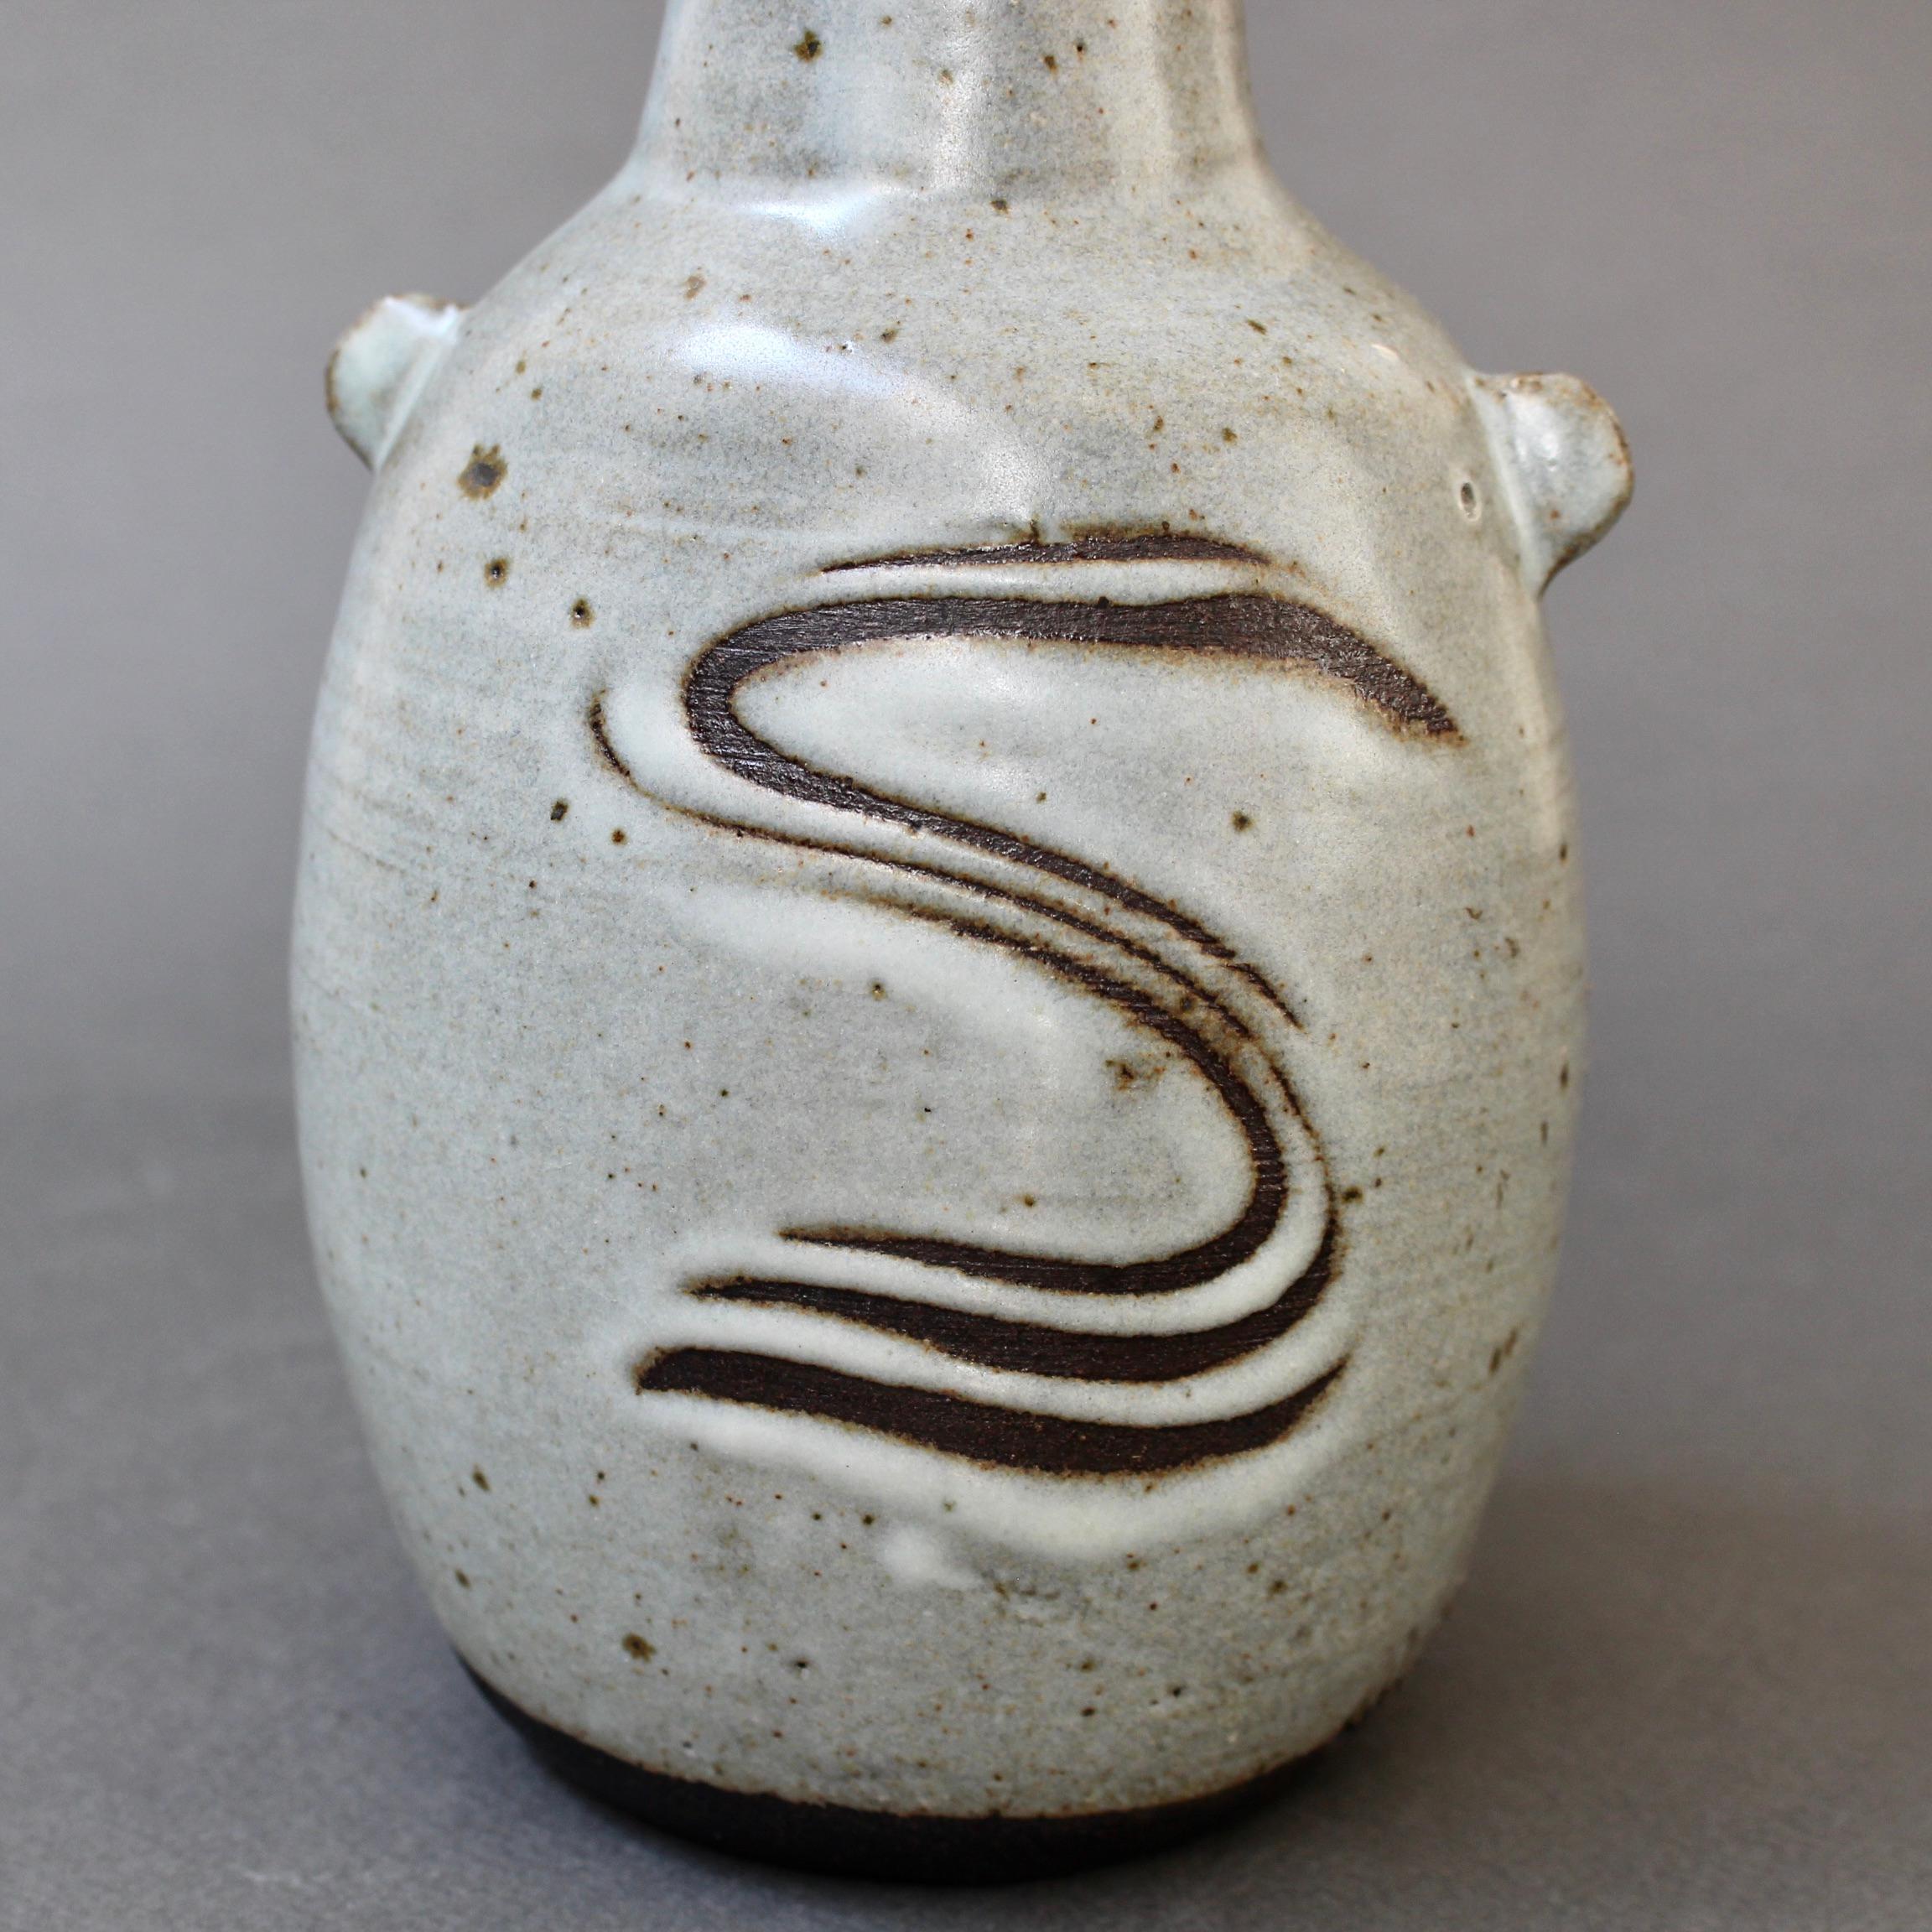 Japanese Style Ceramic Vase with Lugs by Janet Leach '1981' For Sale 2